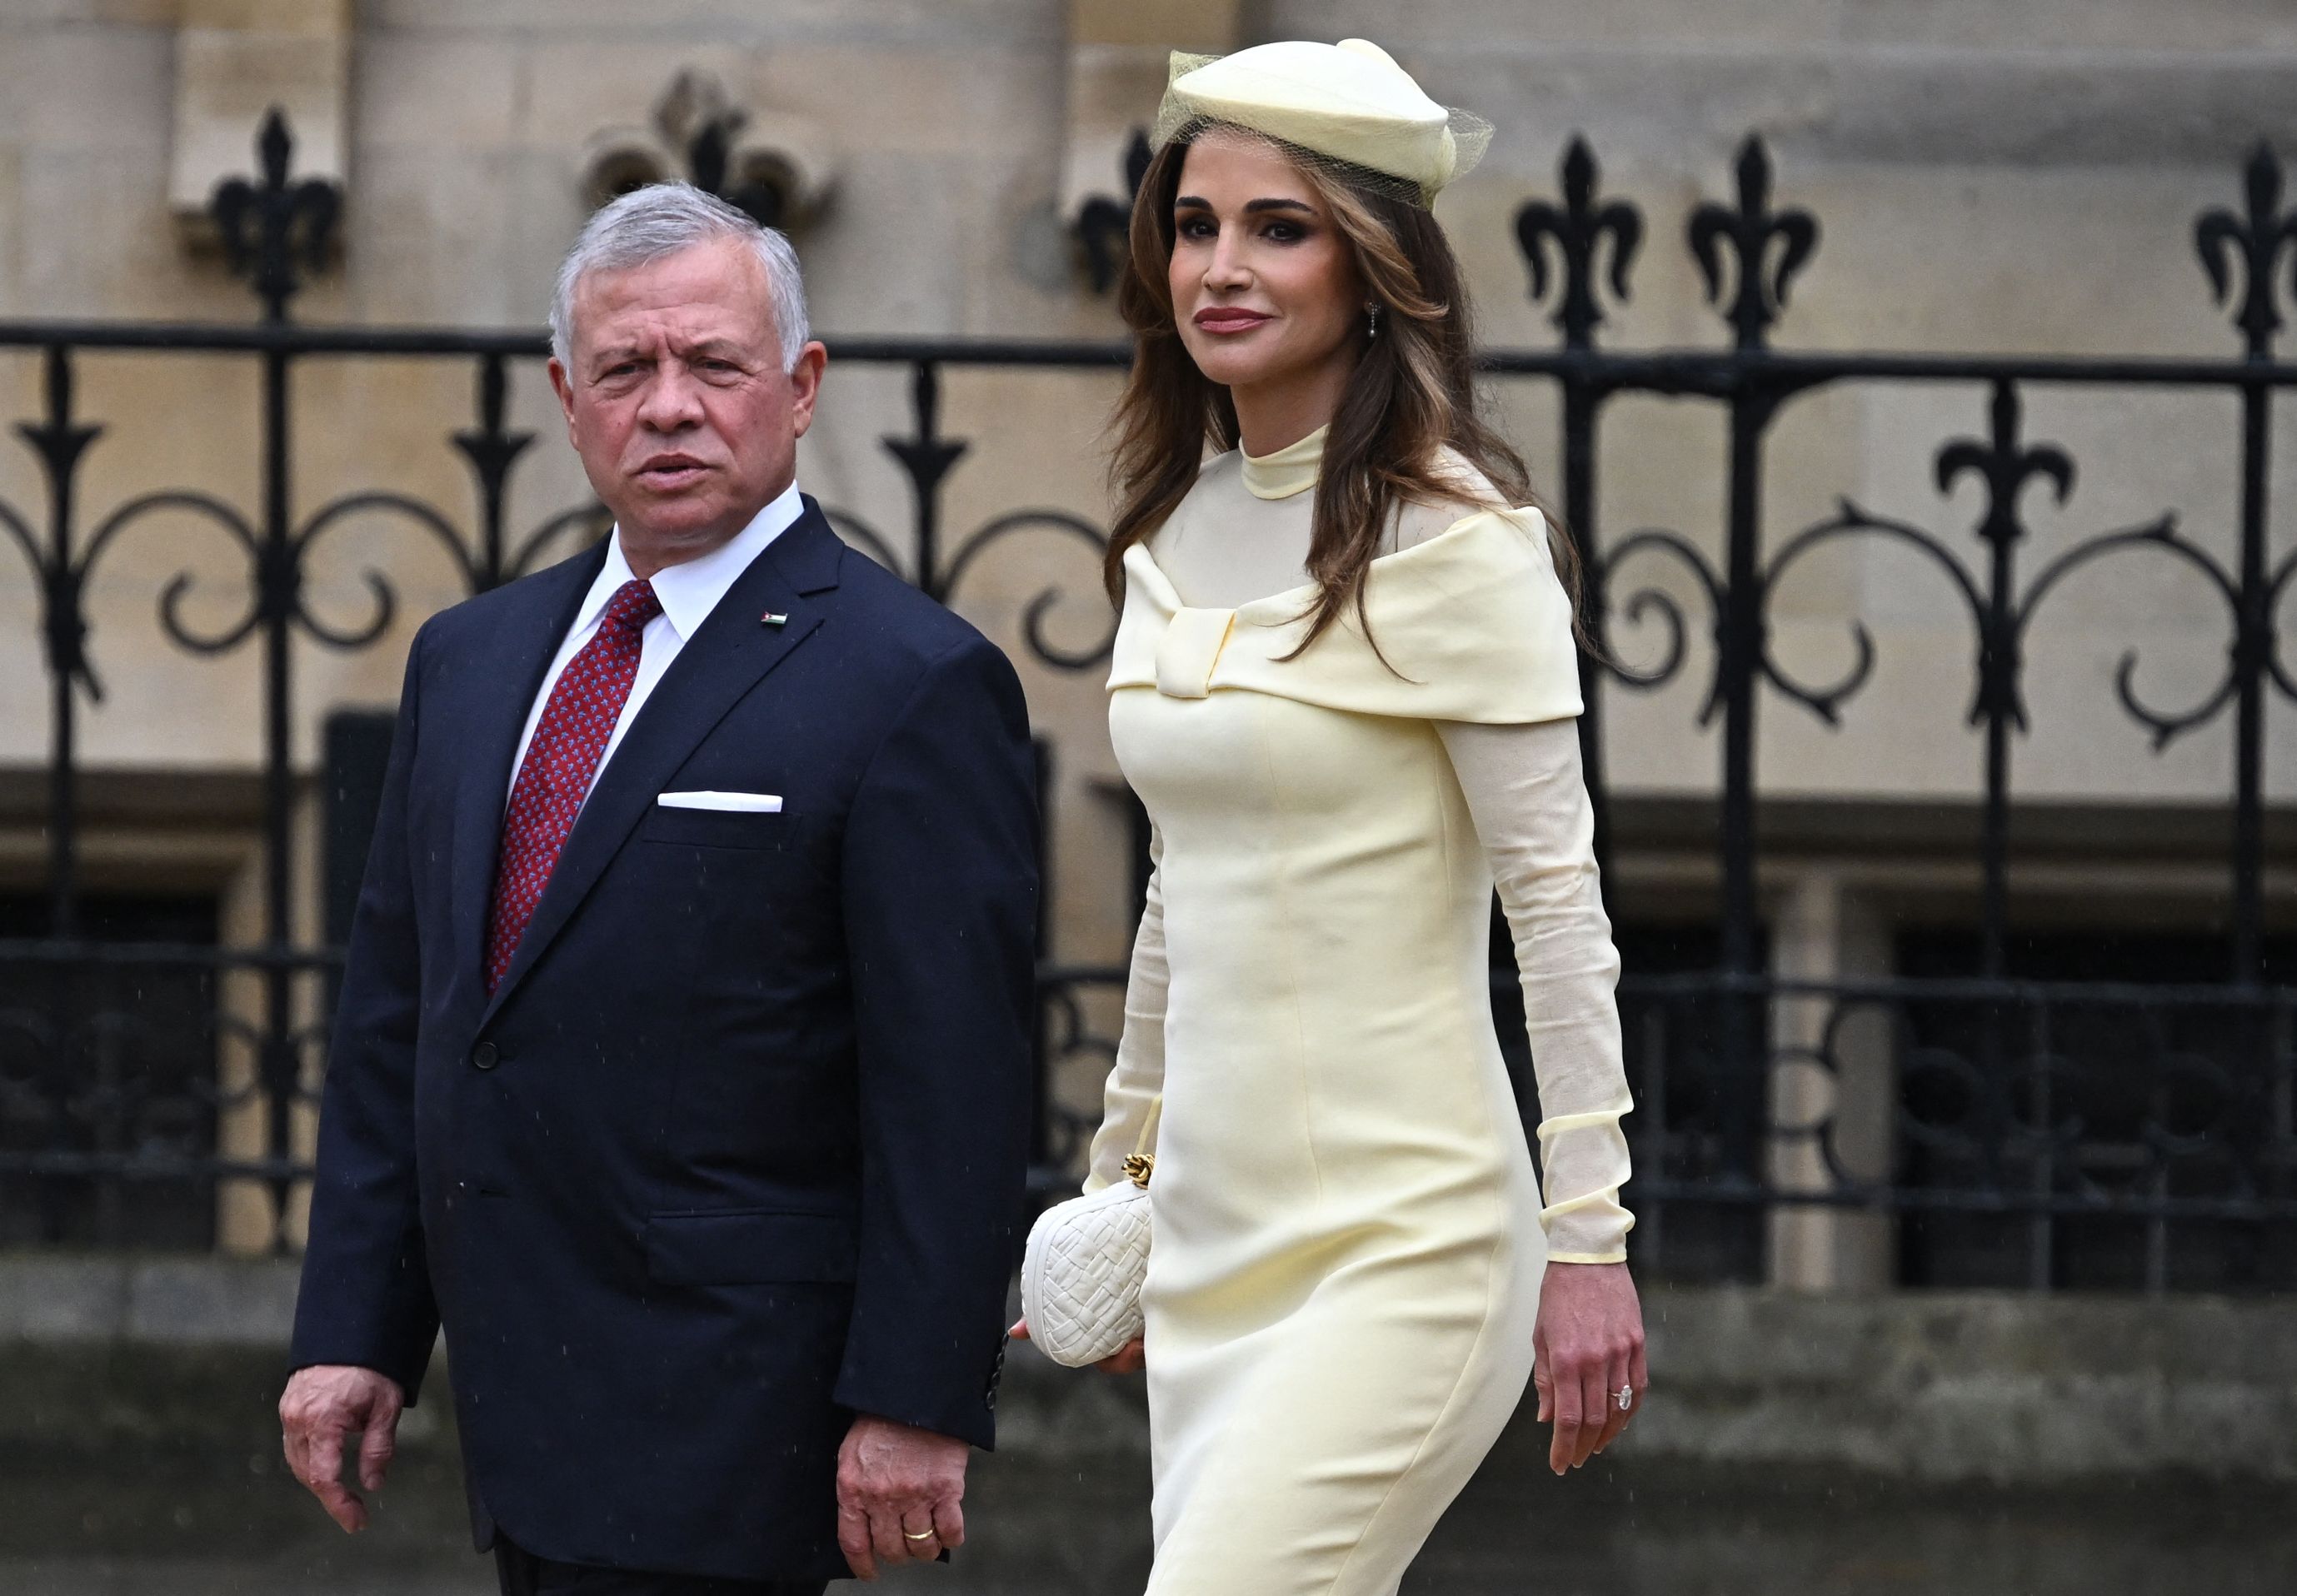 King Abdullah II of Jordan and his wife Rania Al Abdullah were also invited to the ceremony